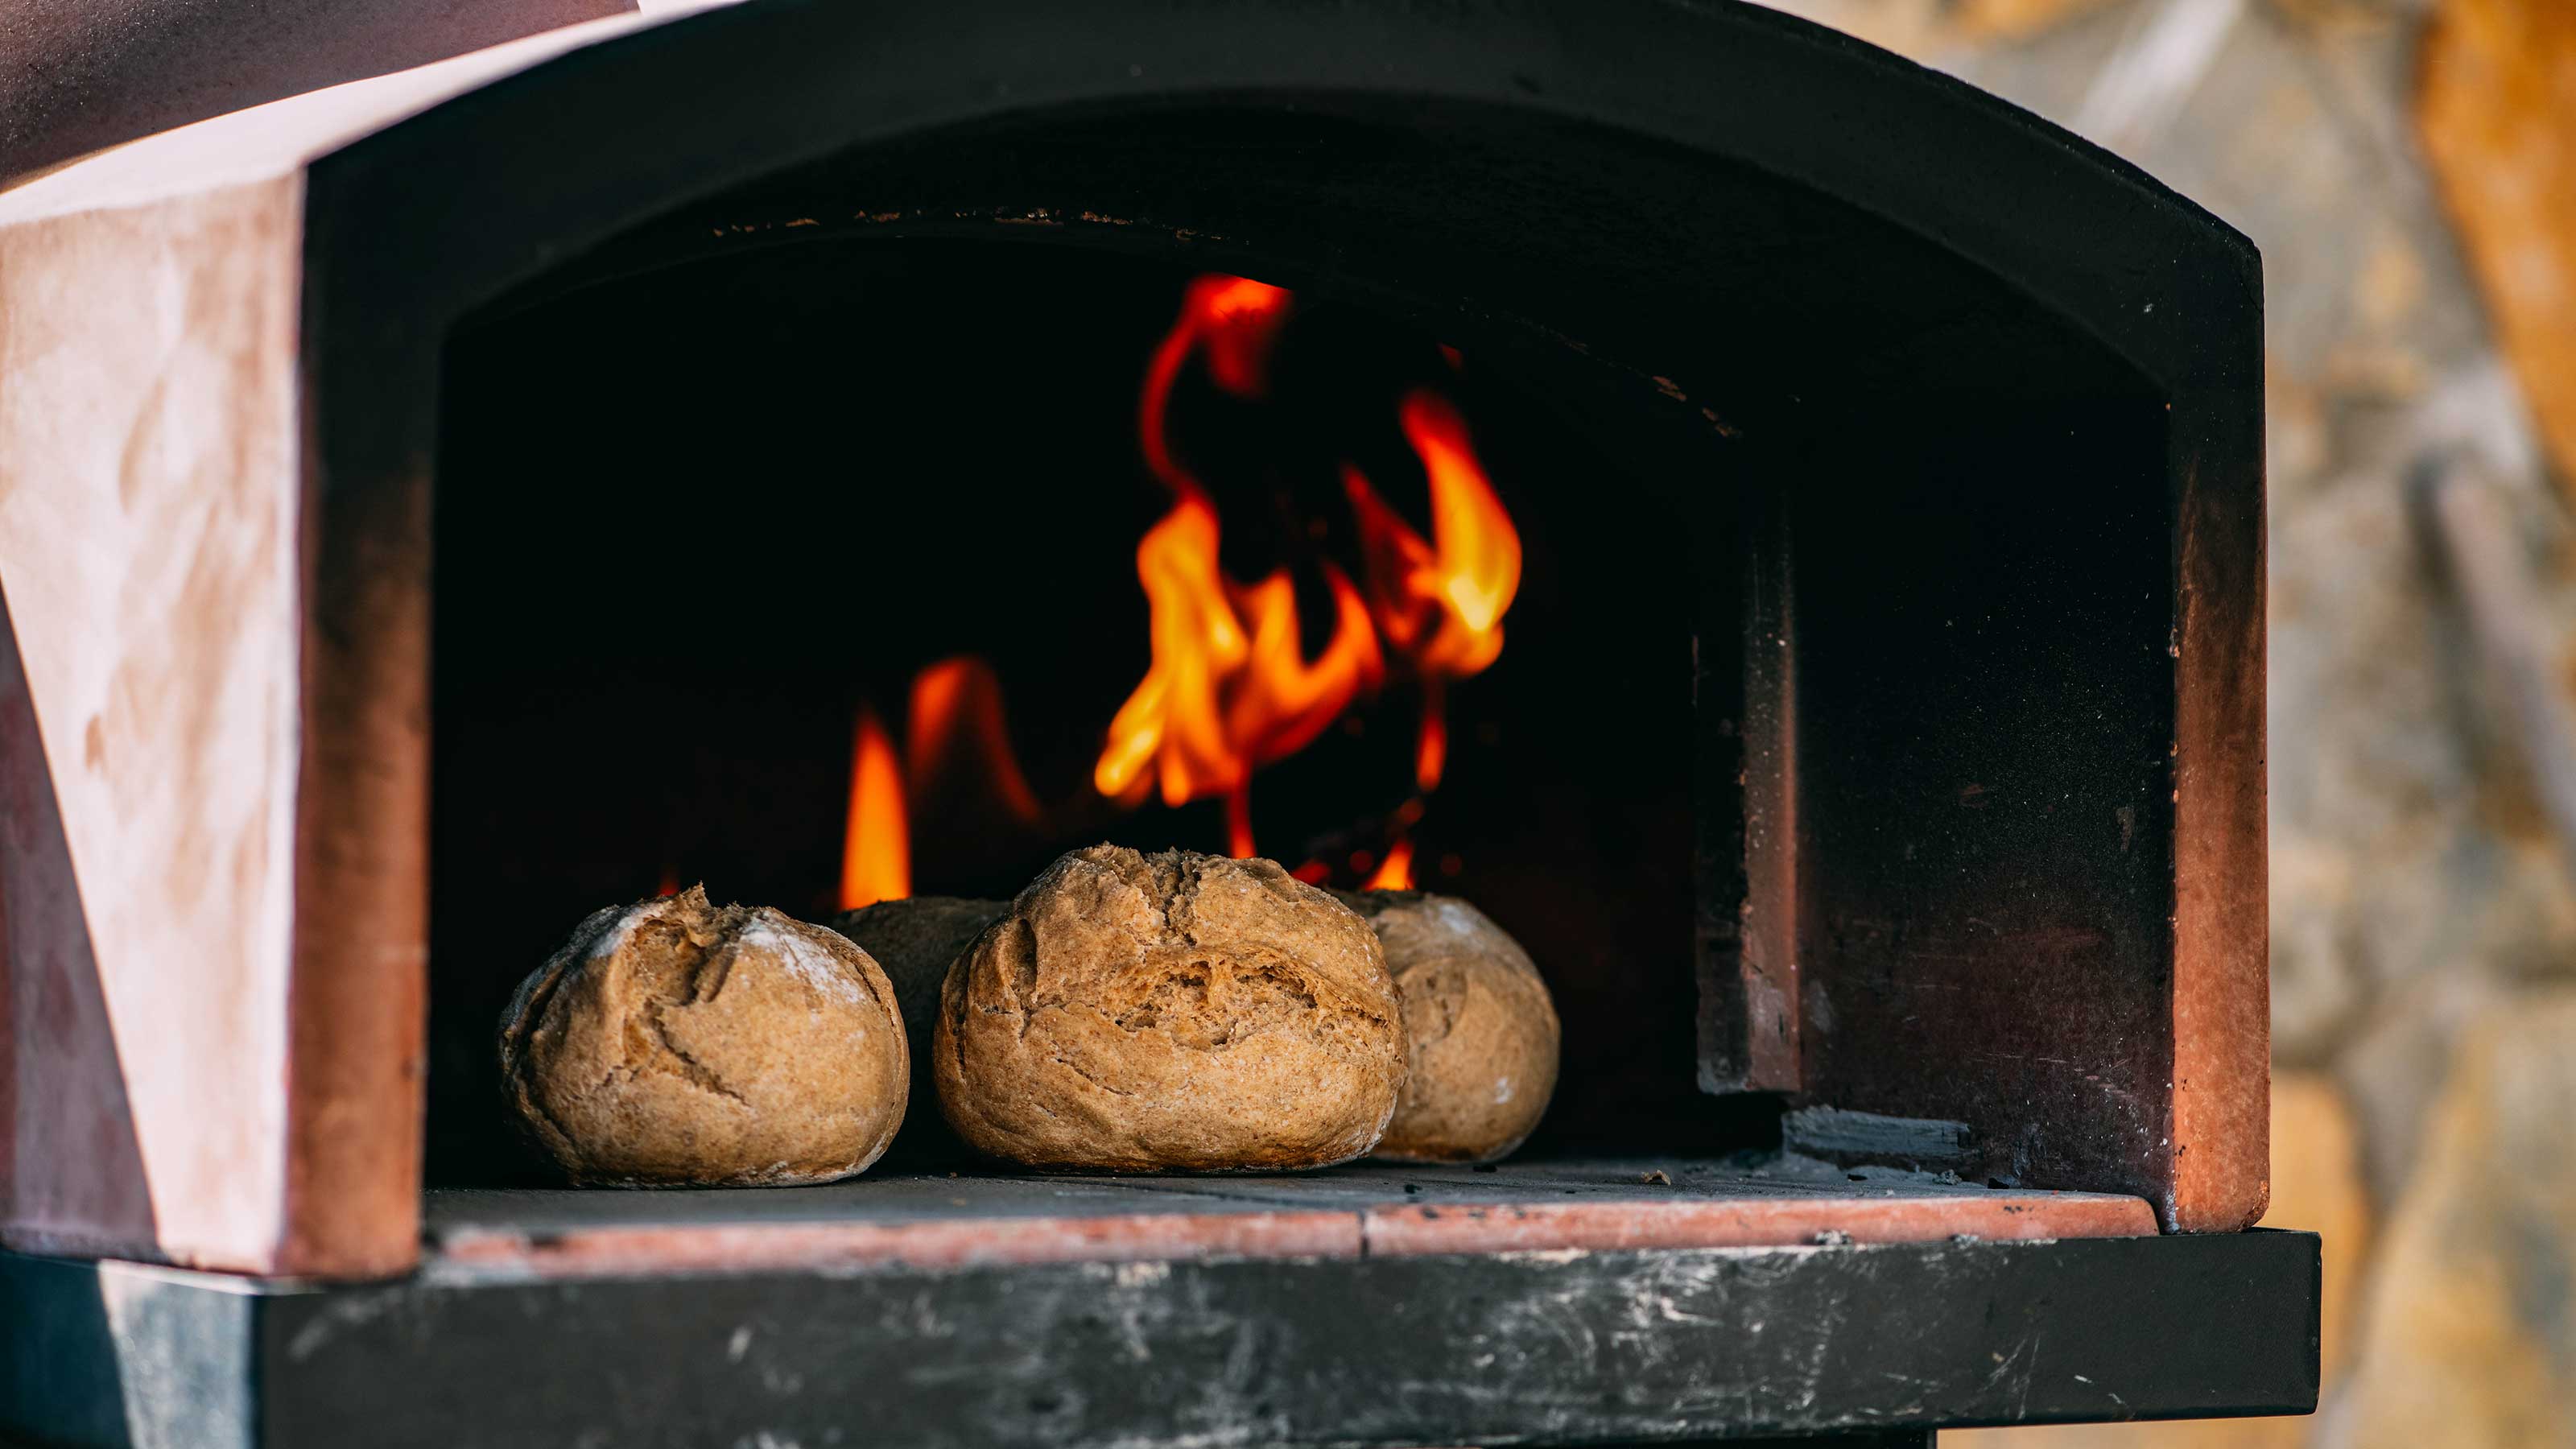 Can you bake bread in a pizza oven? The experts reveal